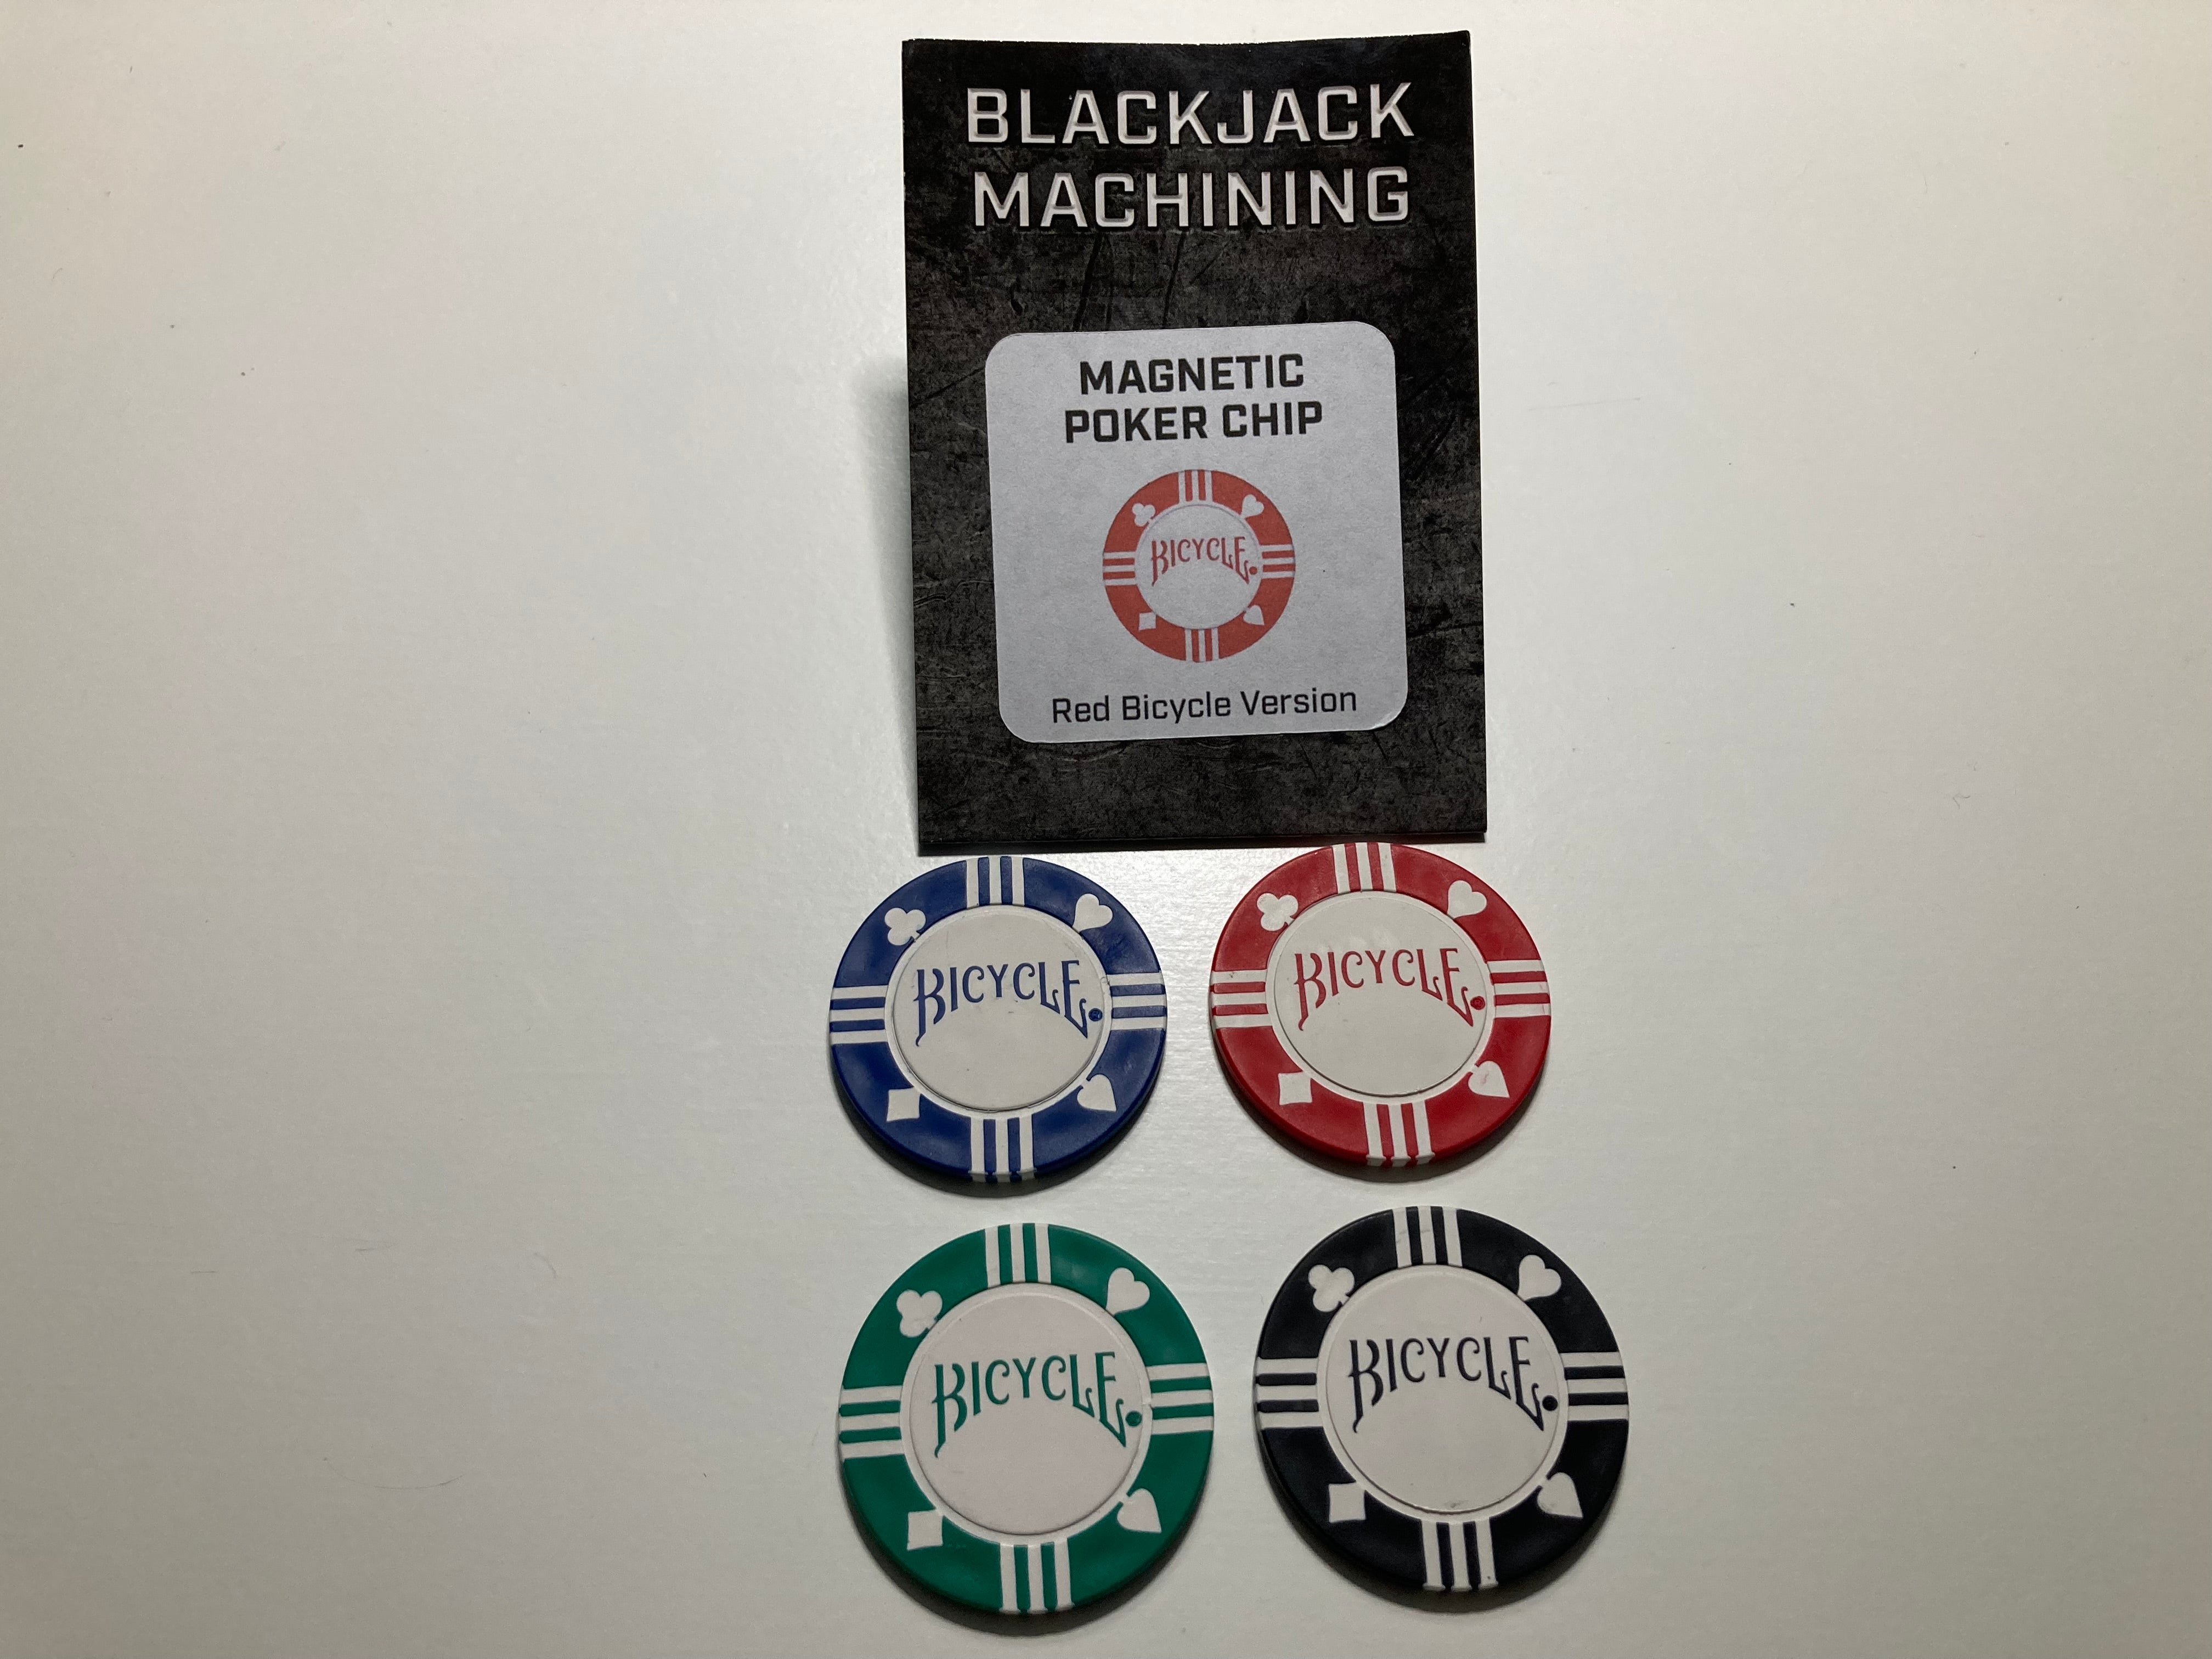 Magnetic Poker Chip Bicycle by Blackjack Machining